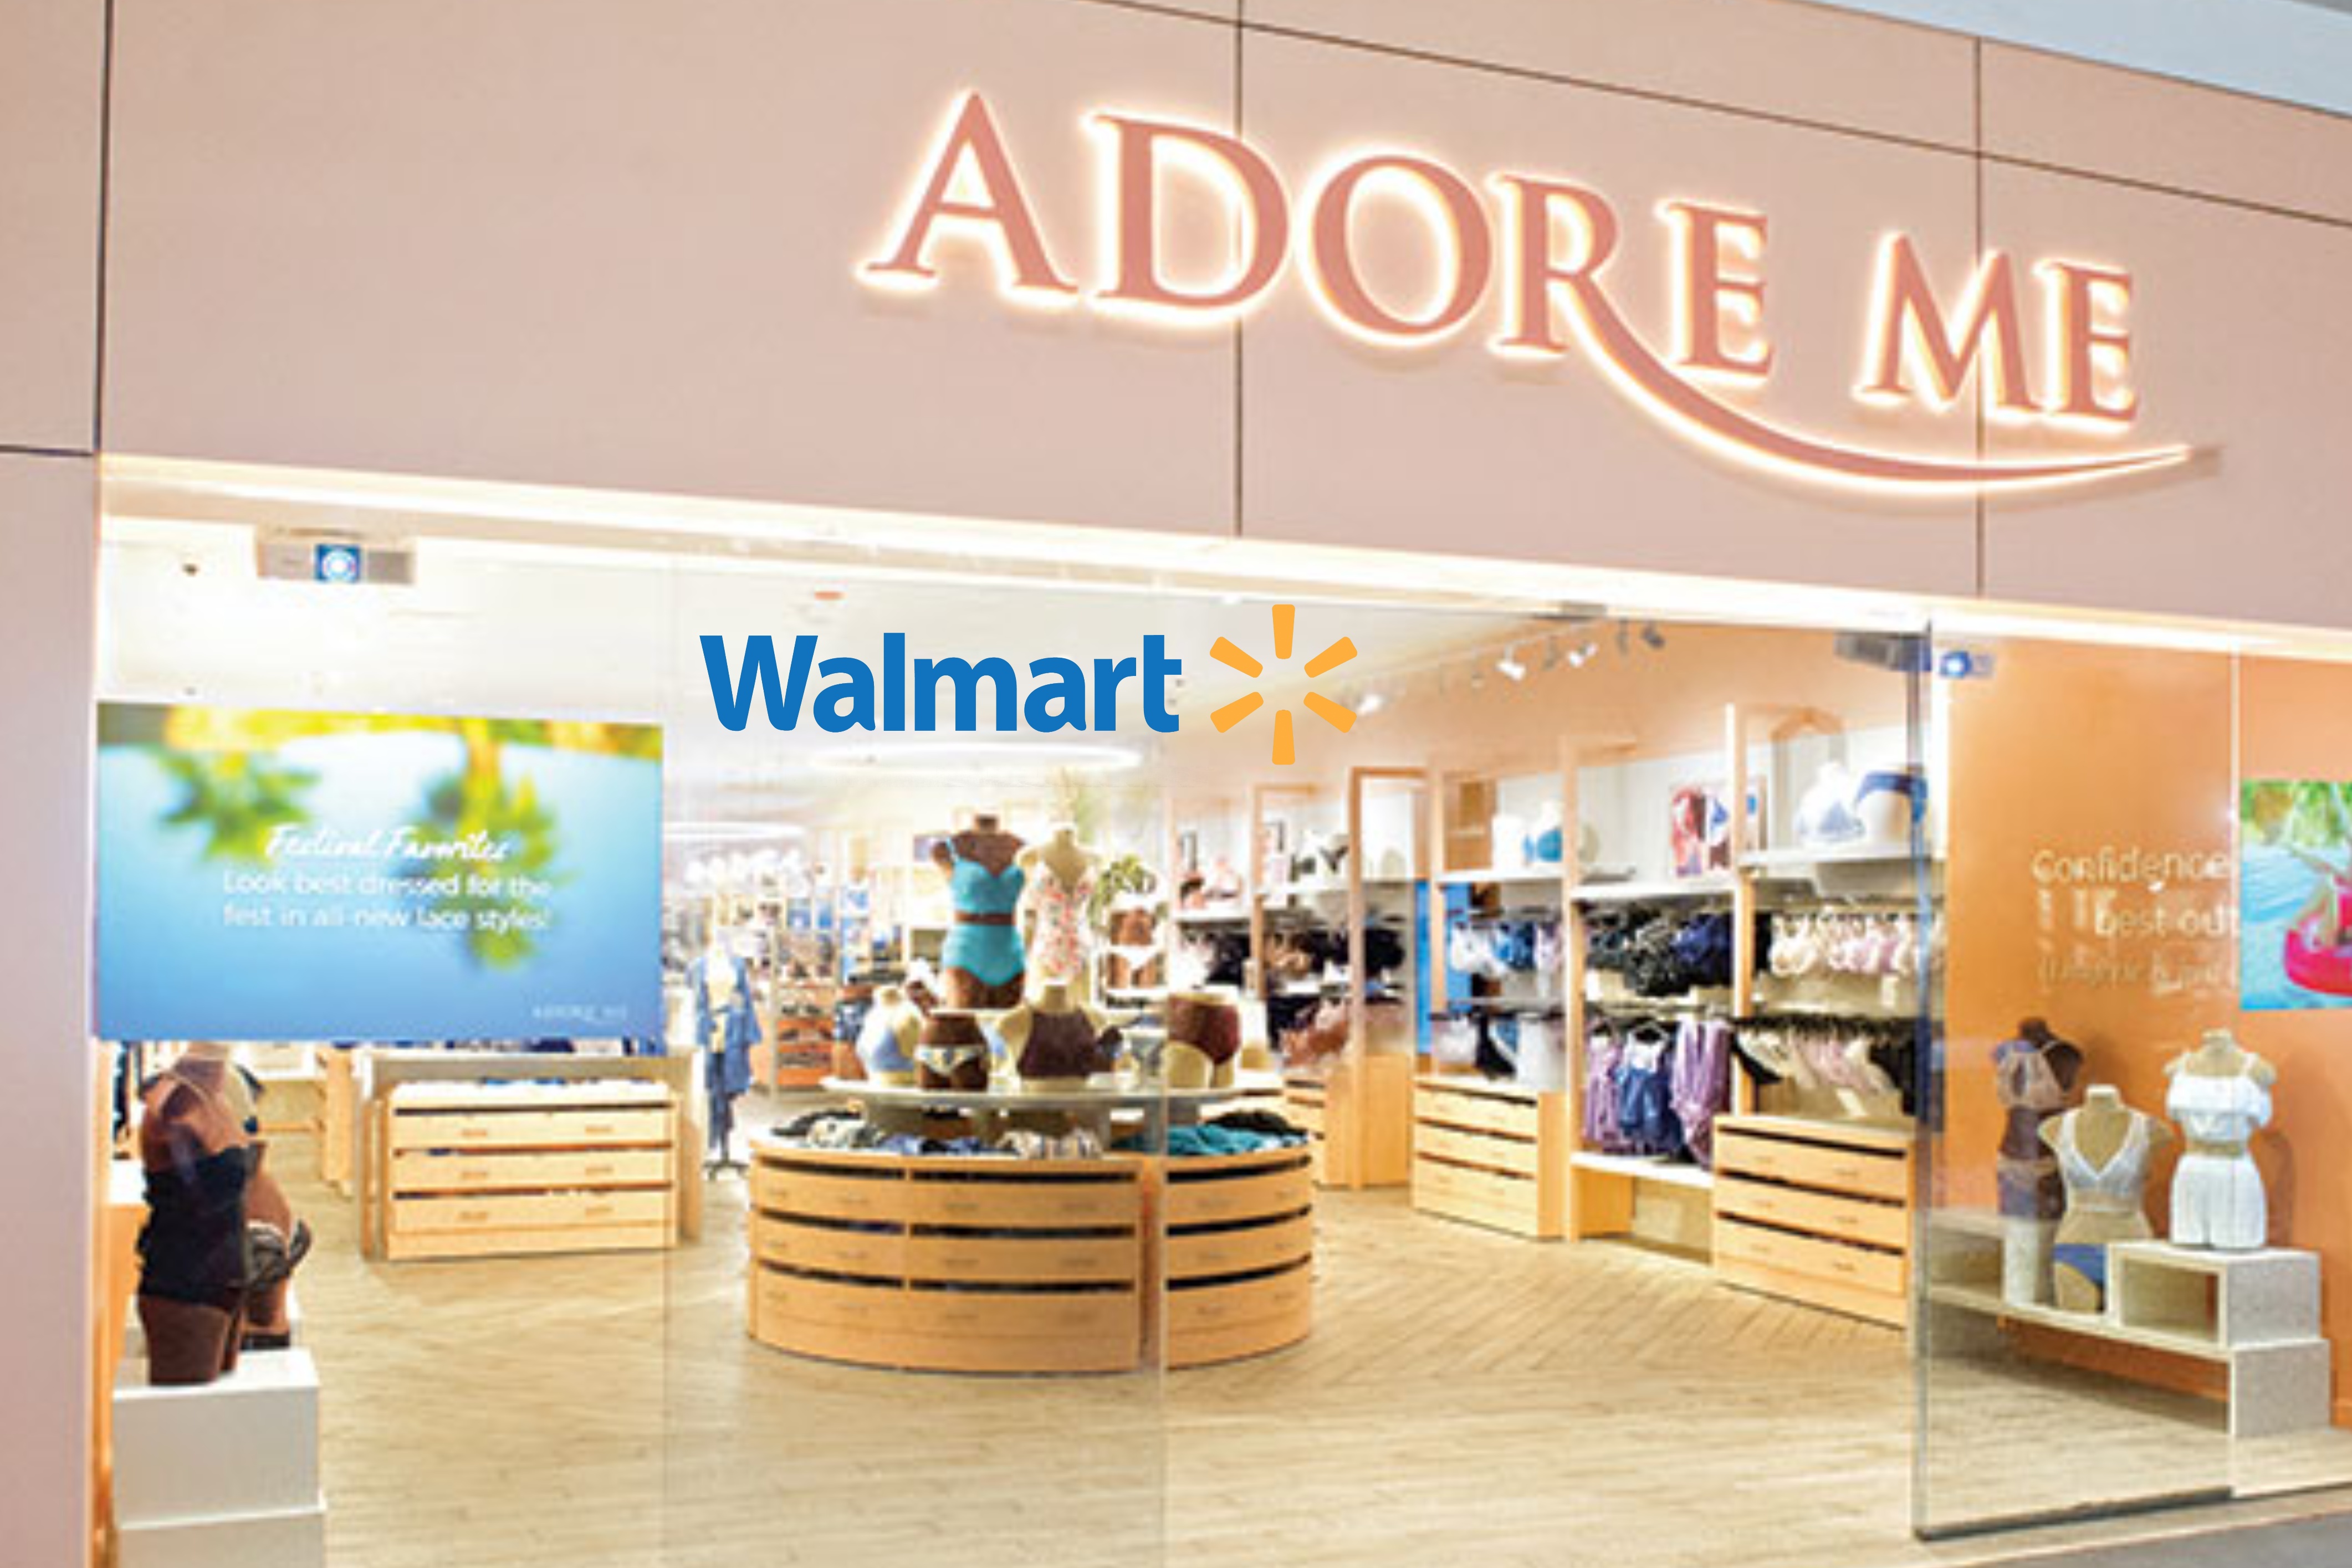 Walmart Launches Second Line from Adore Me, a D2C lingerie brand